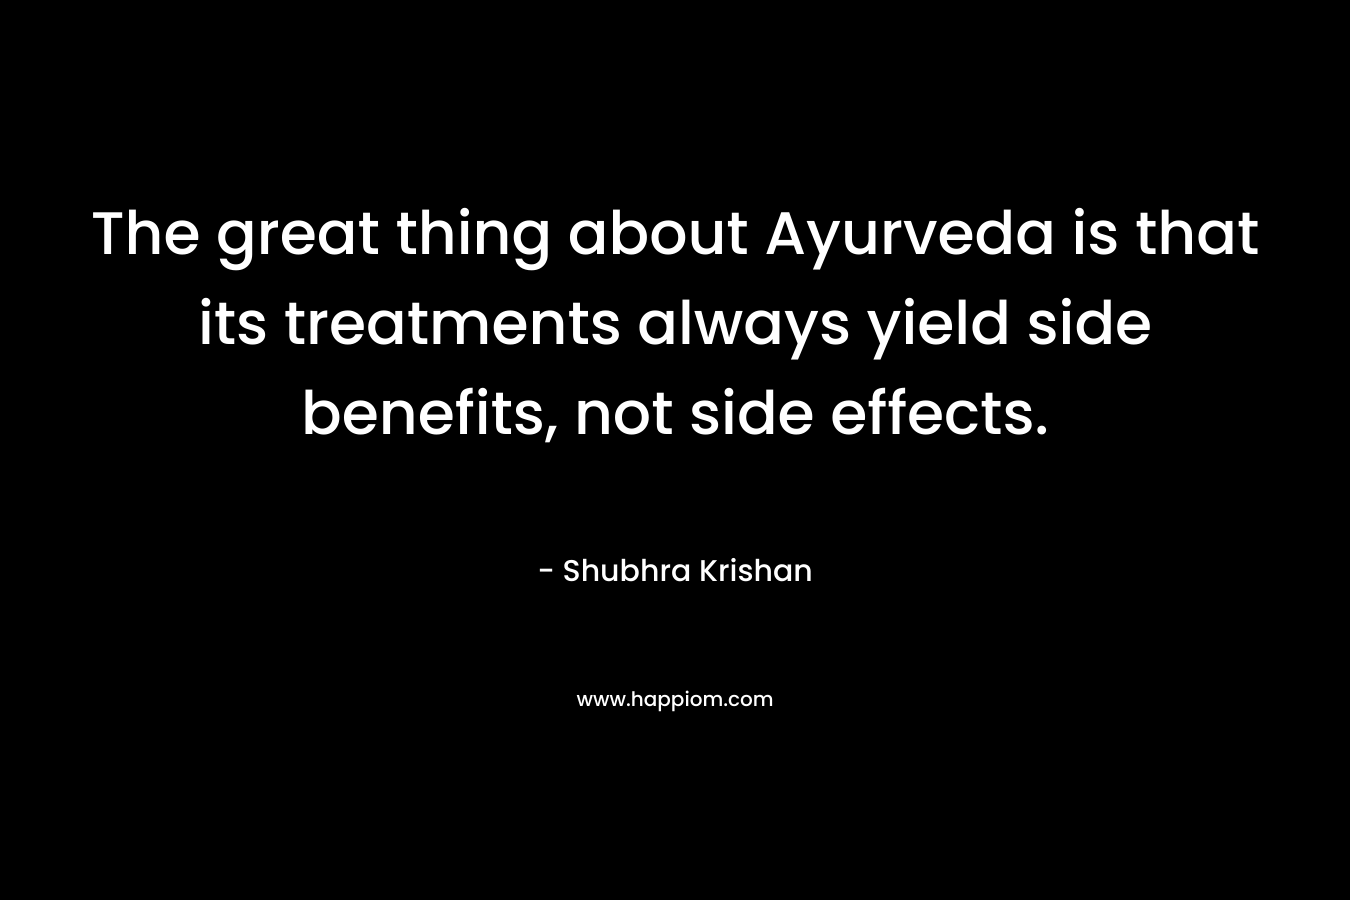 The great thing about Ayurveda is that its treatments always yield side benefits, not side effects. – Shubhra Krishan